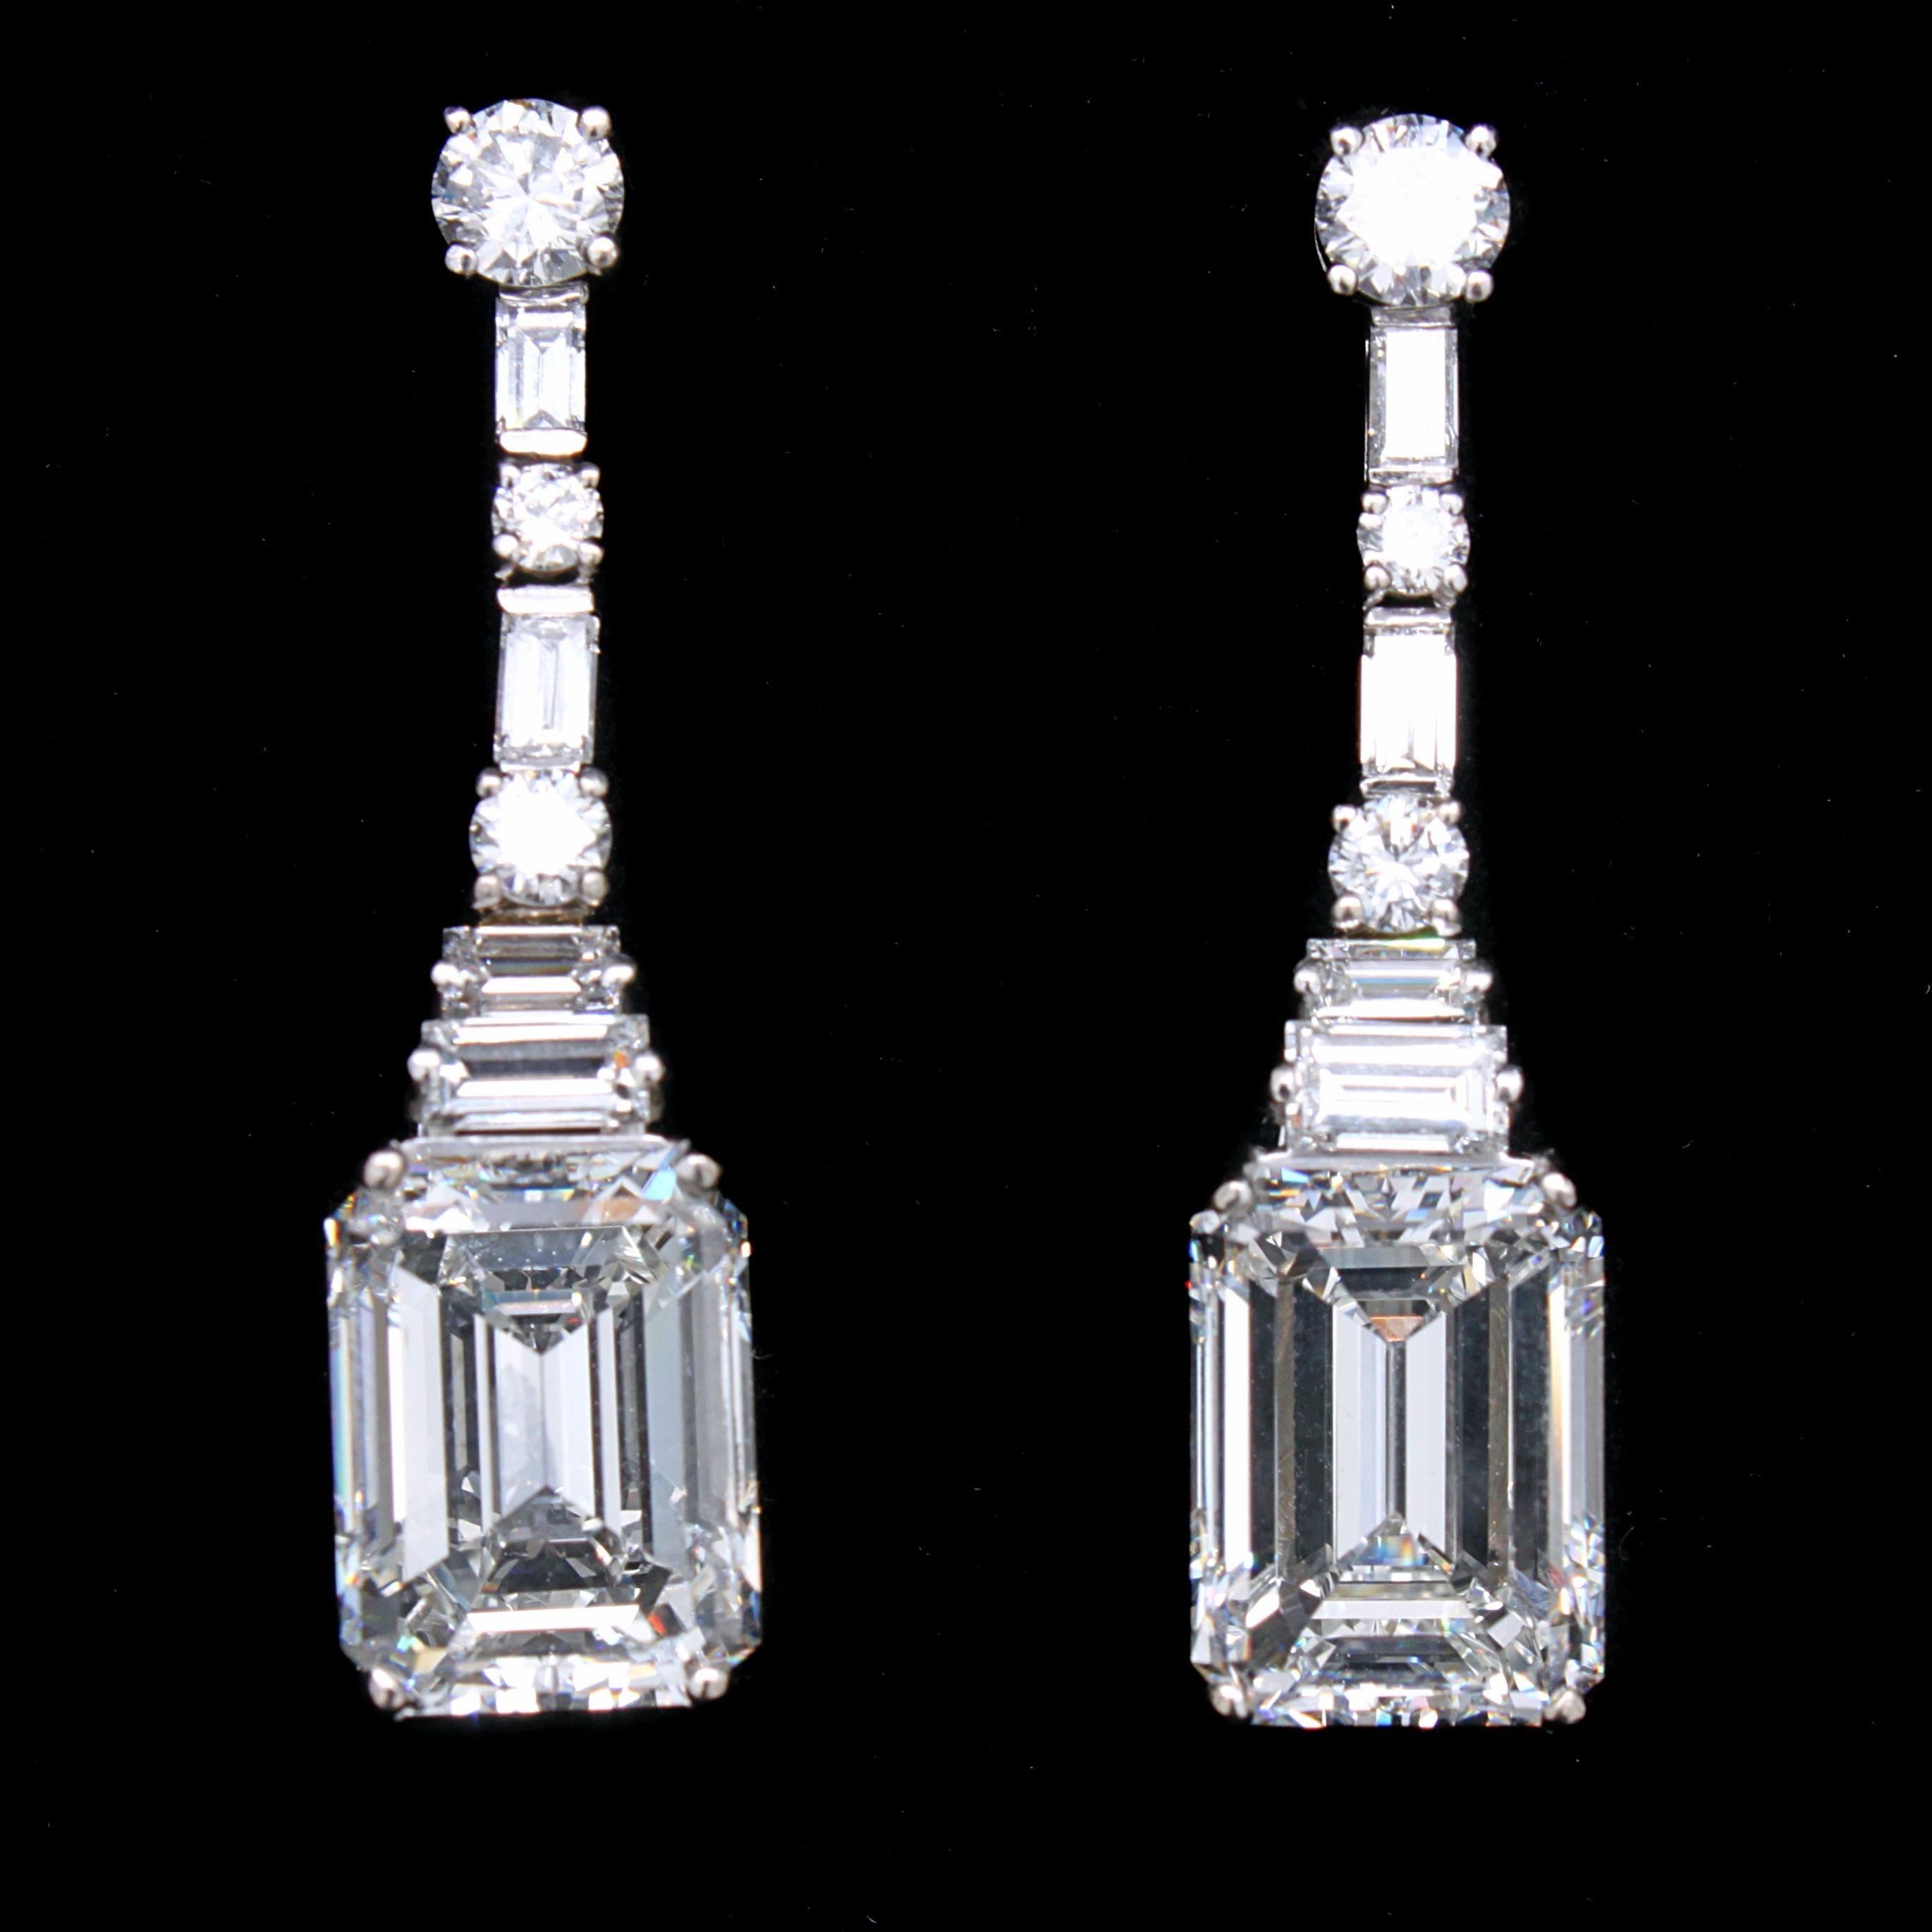 A stunning pair of emerald cut diamond Art Deco earrings, ca. 1930s. 

The two large stones weigh 5.37ct (H-VVS2, potentially IF) and 5.26ct (H-VS1) respectively - accompanied by GIA certificates. They are topped by round brilliant cut diamonds and